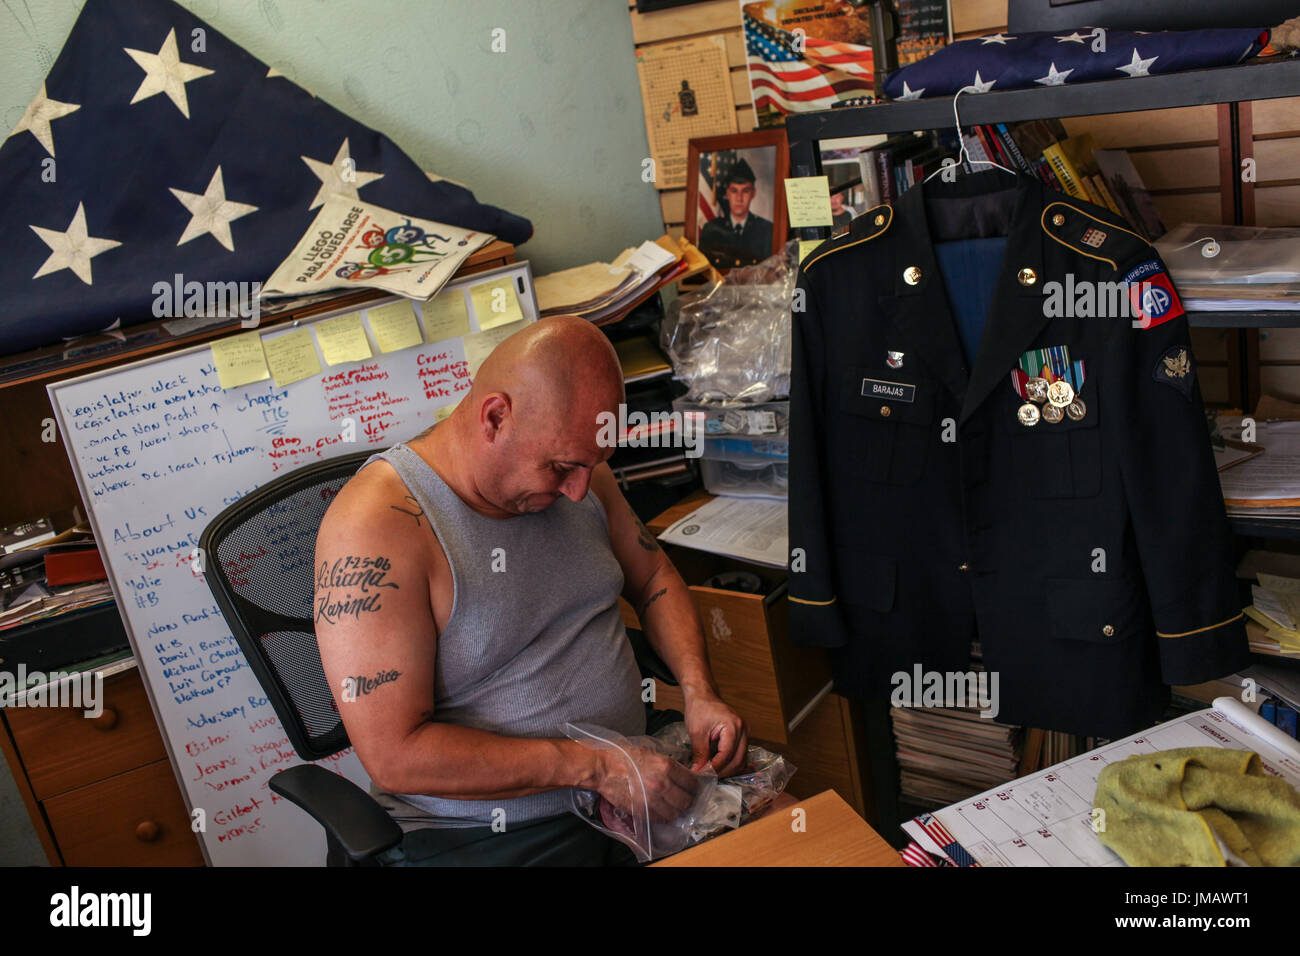 Tijuana, Baja California, Mexico. 7th July, 2017. HECTOR BARAJAS-VARELA, a deported U.S. Army veteran, prepares medals for his uniform at the Deported Veterans Support House in Tijuana, Baja California, Mexico. Barajas-Varela runs a shelter and resource center for deported U.S. military veterans in Tijuana known as, ''The Bunker. Credit: Joel Angel Juarez/ZUMA Wire/Alamy Live News Stock Photo